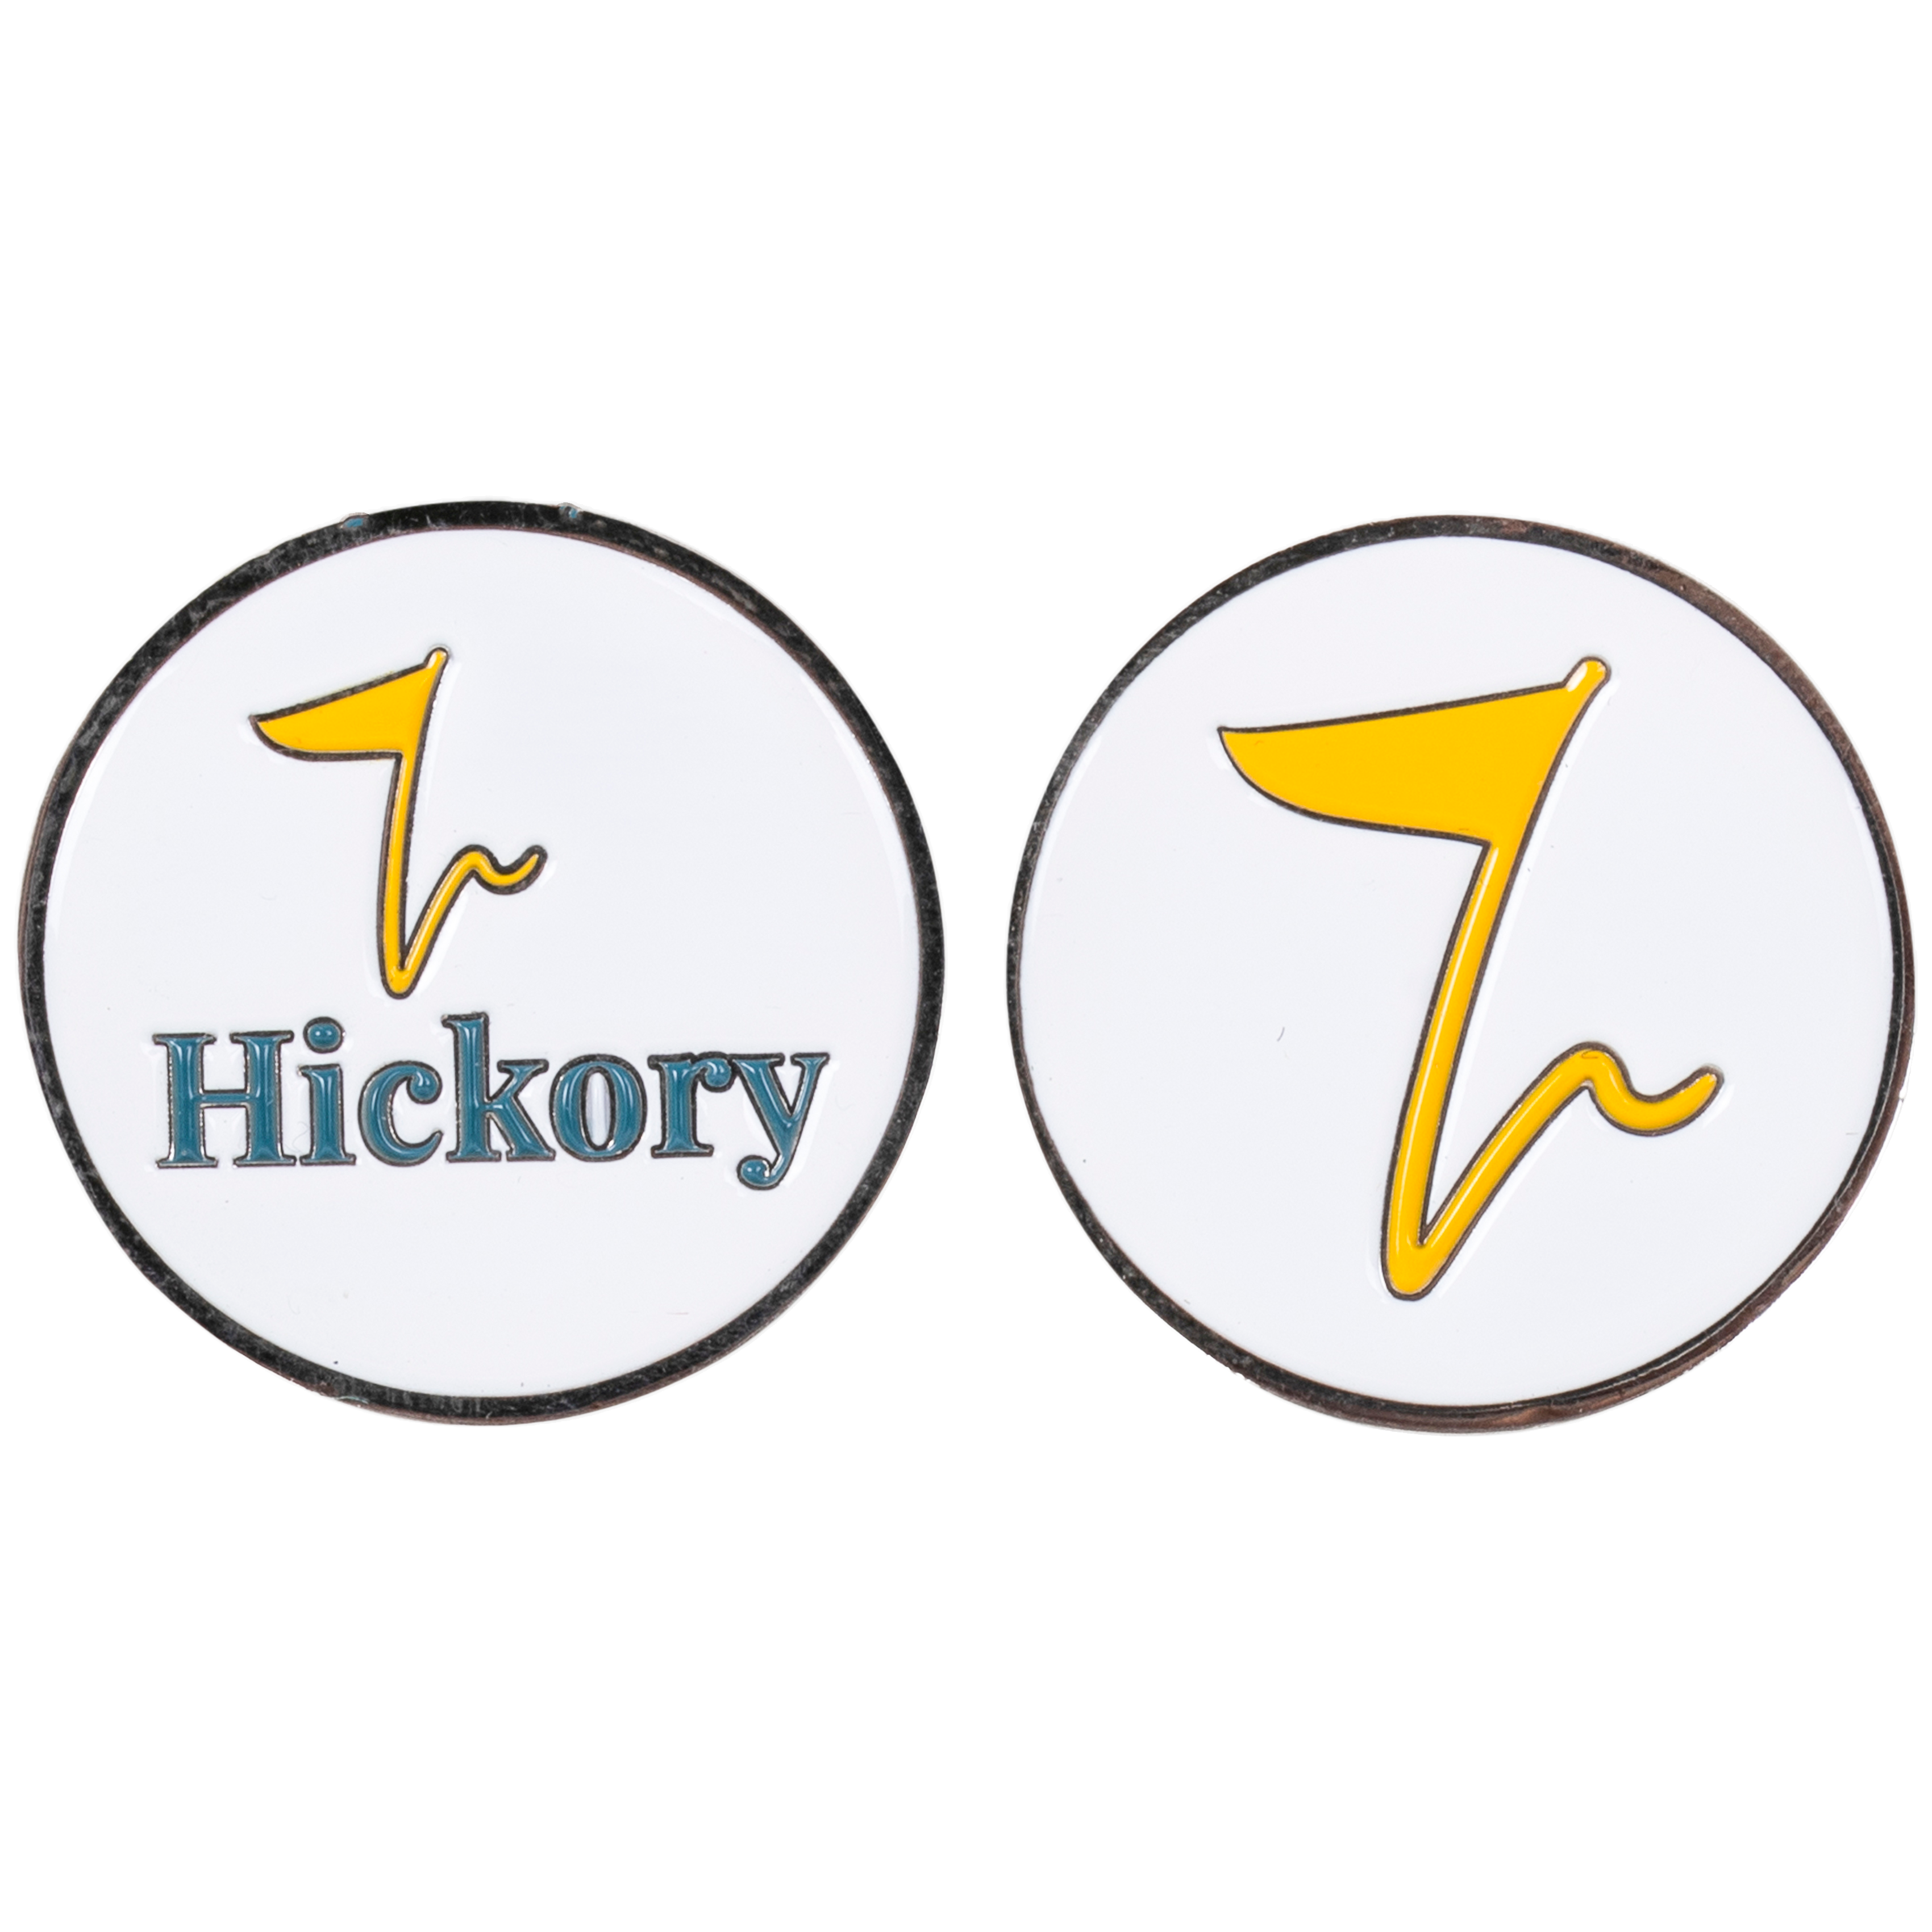 Hickory Ball Markers